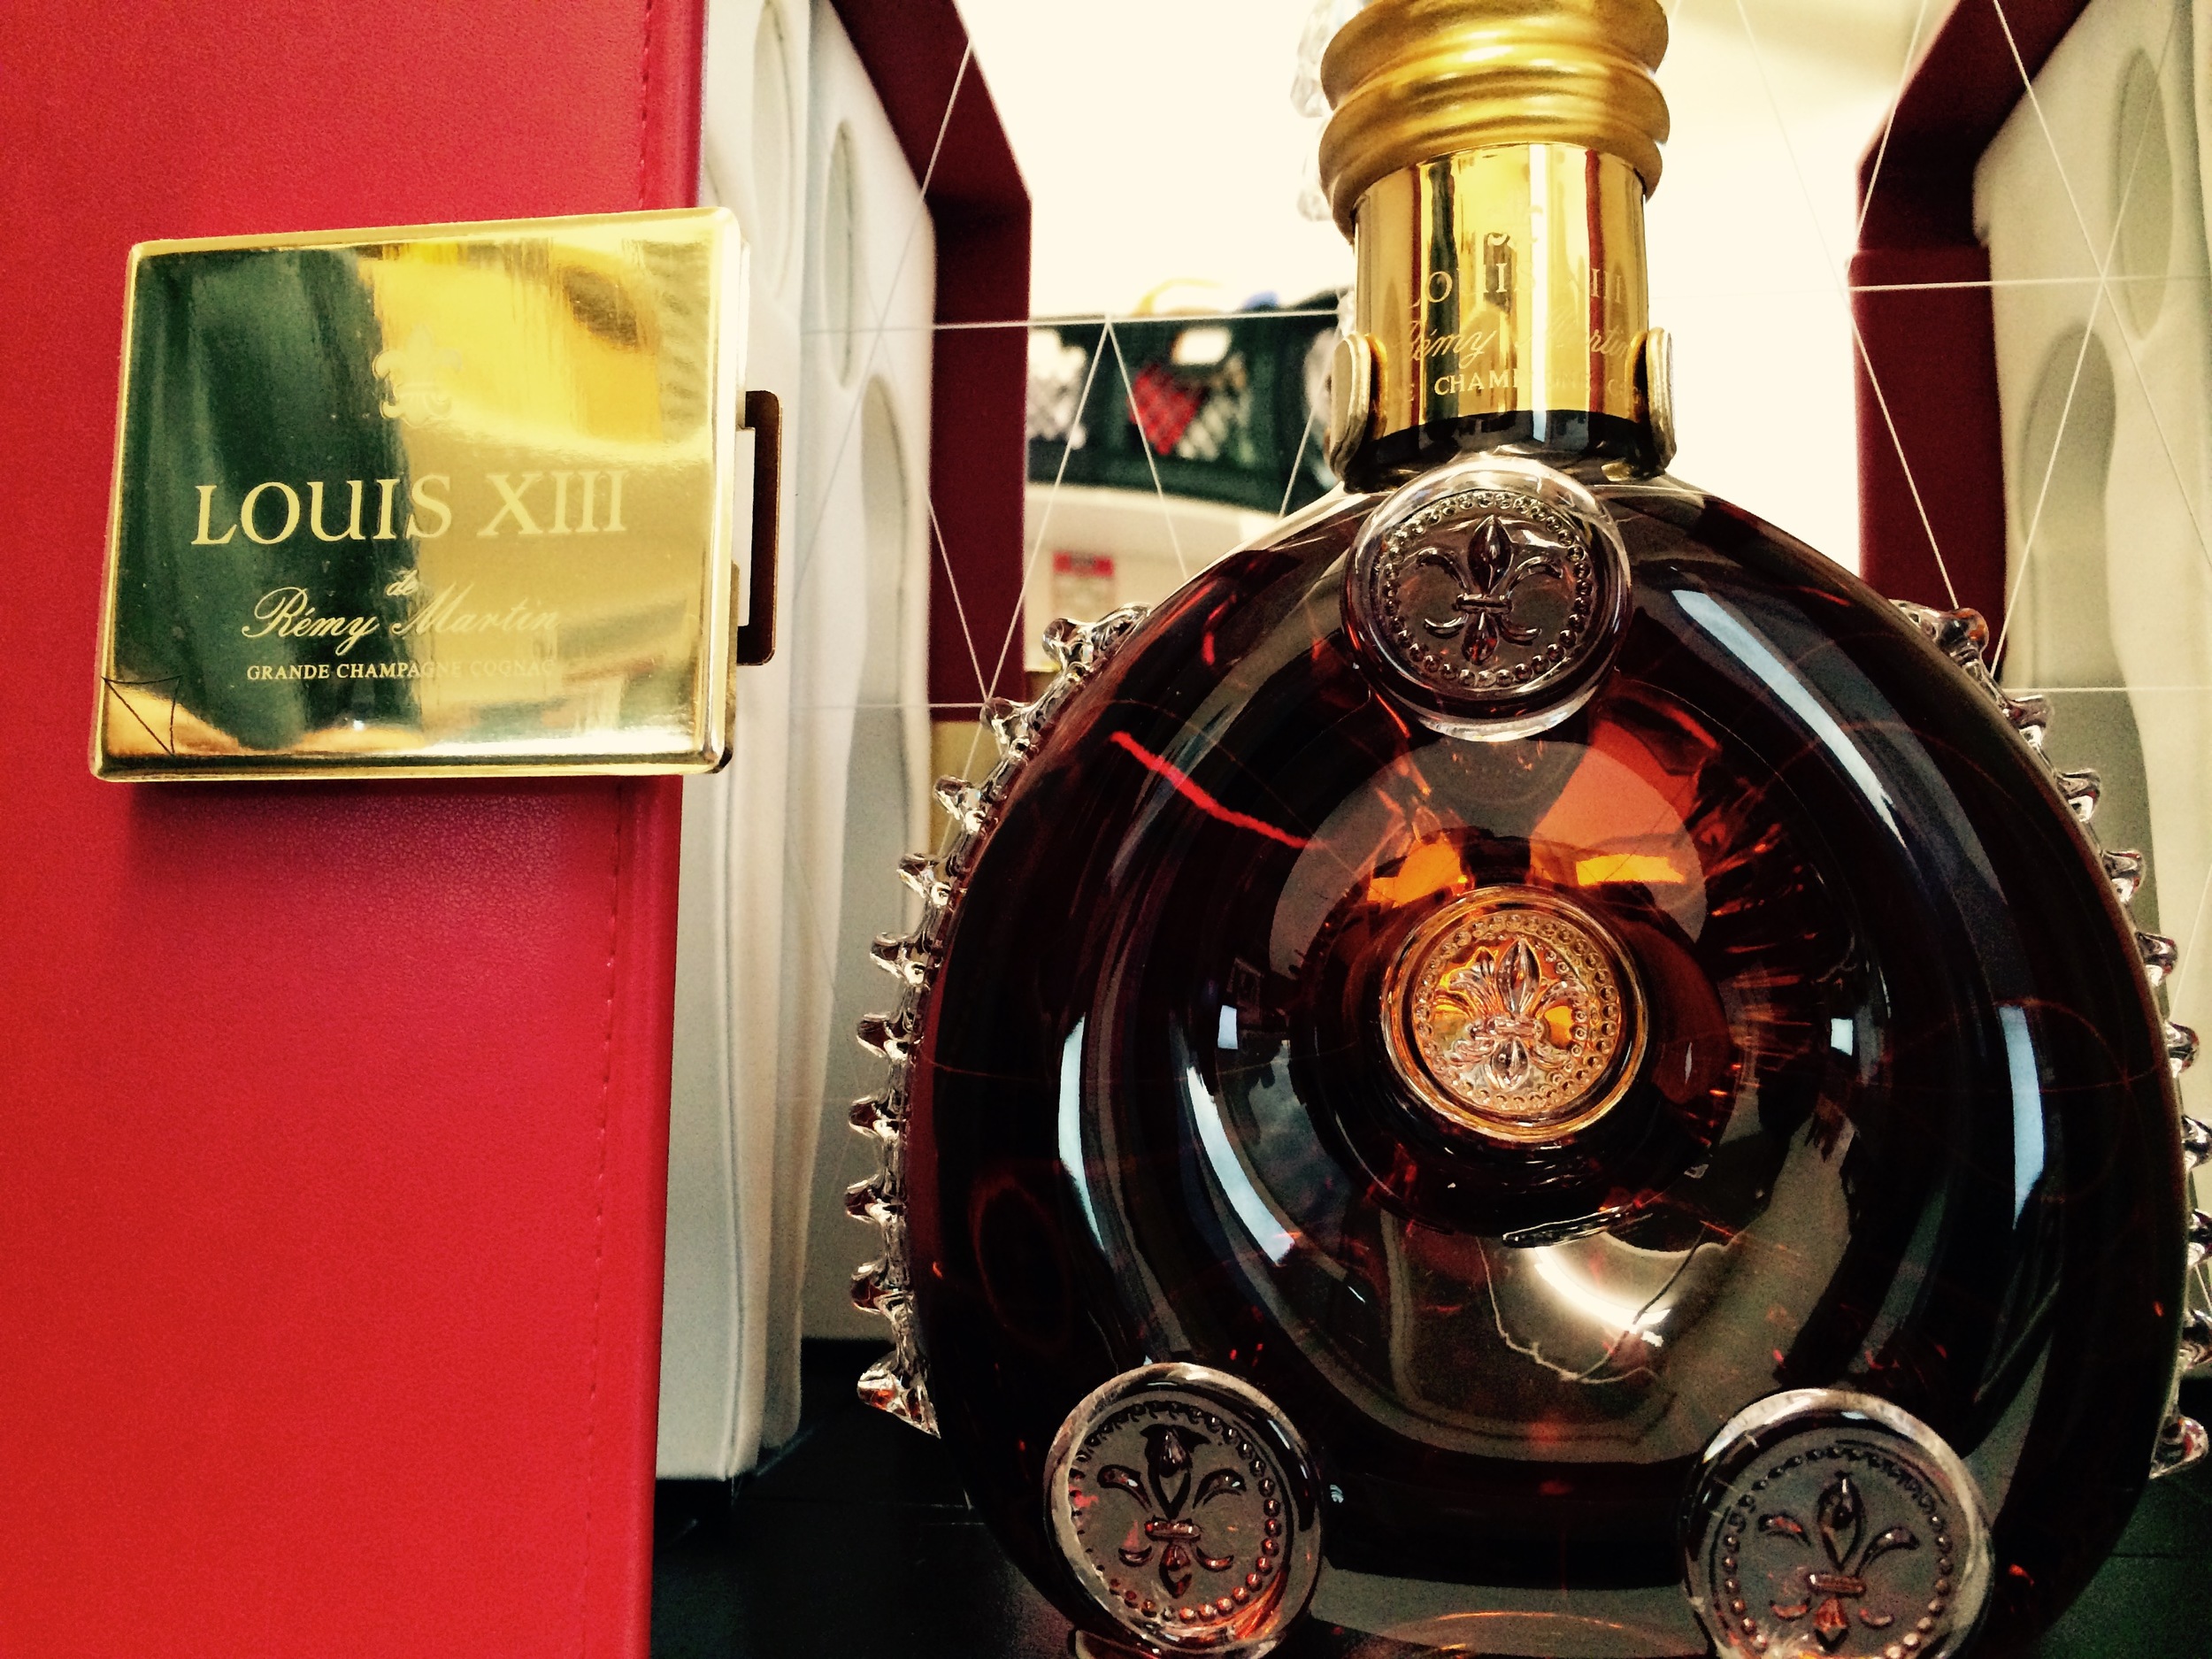 The Louis XIII Grand Gold Bar is made from booze and chocolate. 🍫 Footage  courtesy of @crepesofwrath #insiderdessert @carolinemishelle